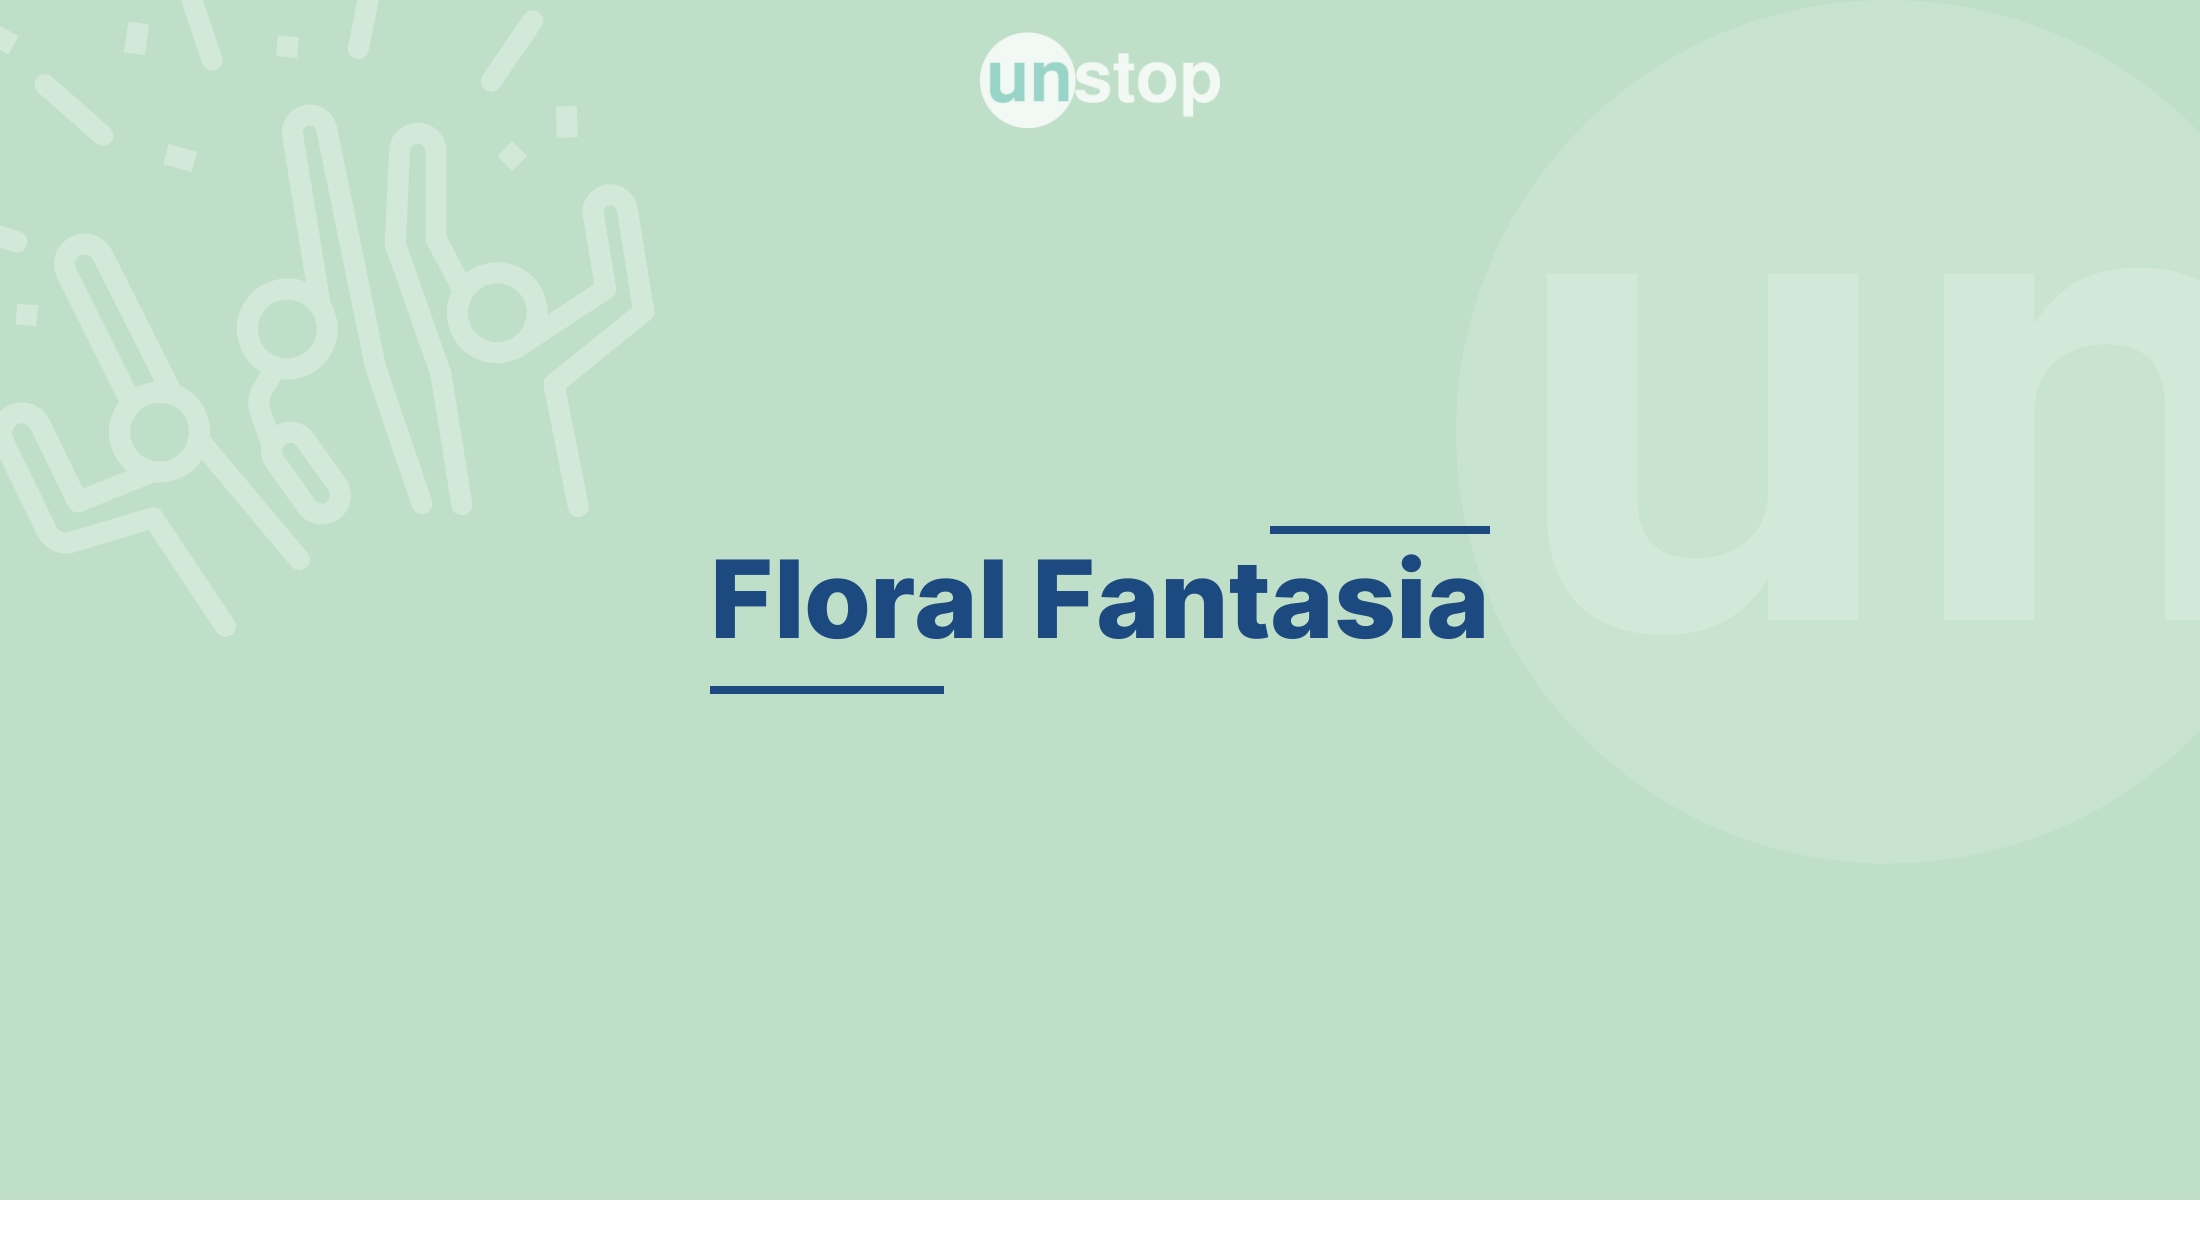 About – Floral Fantasia